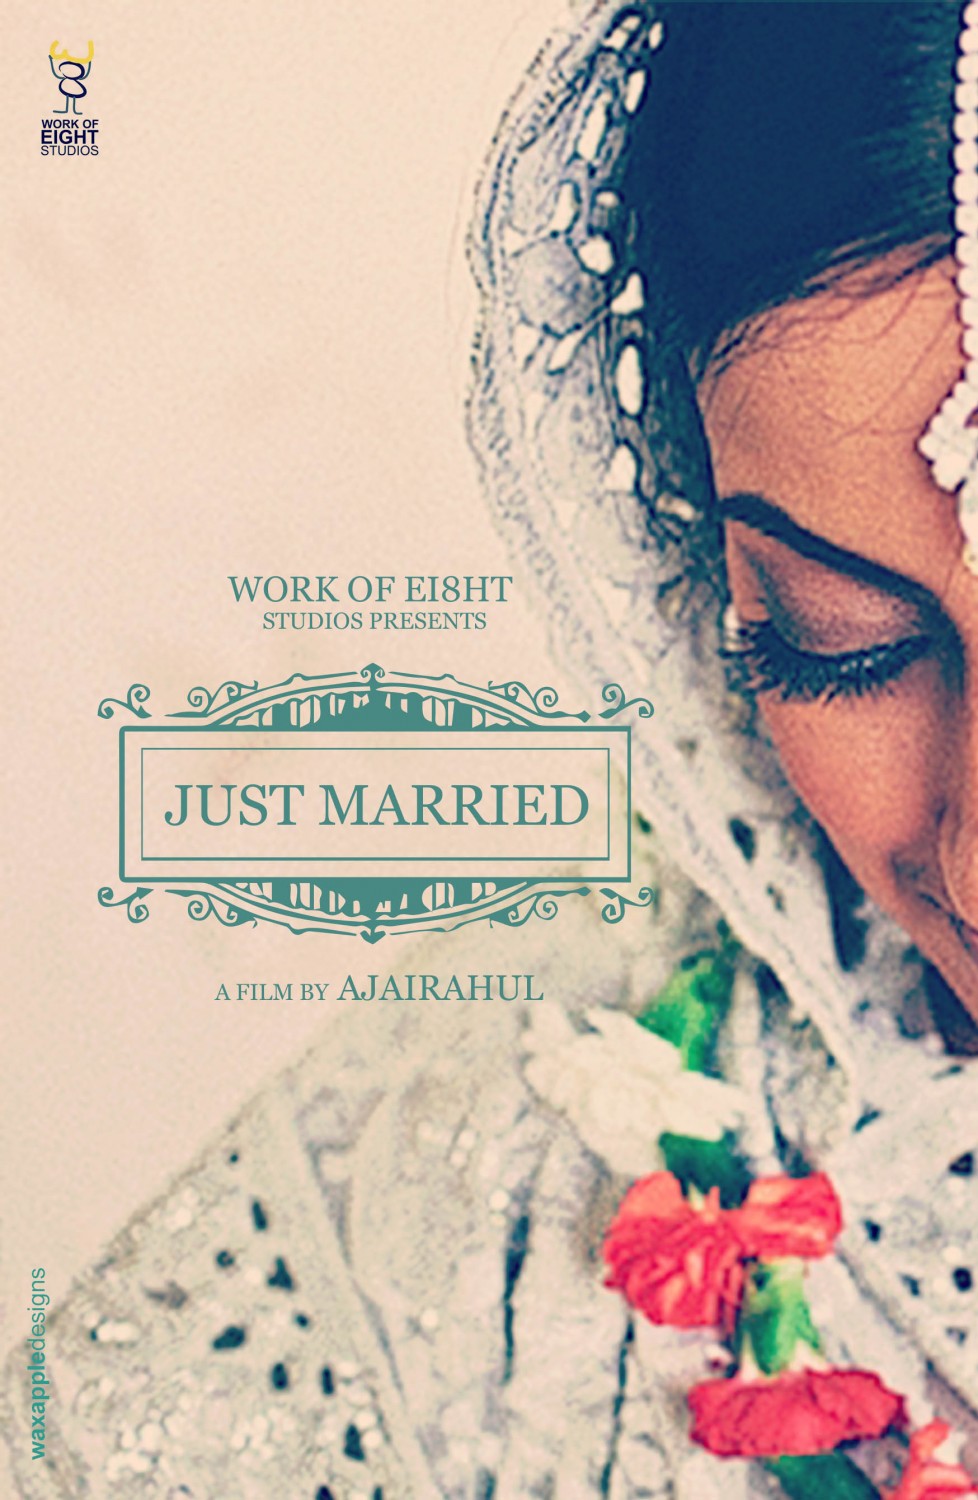 watch the movie just married online for free